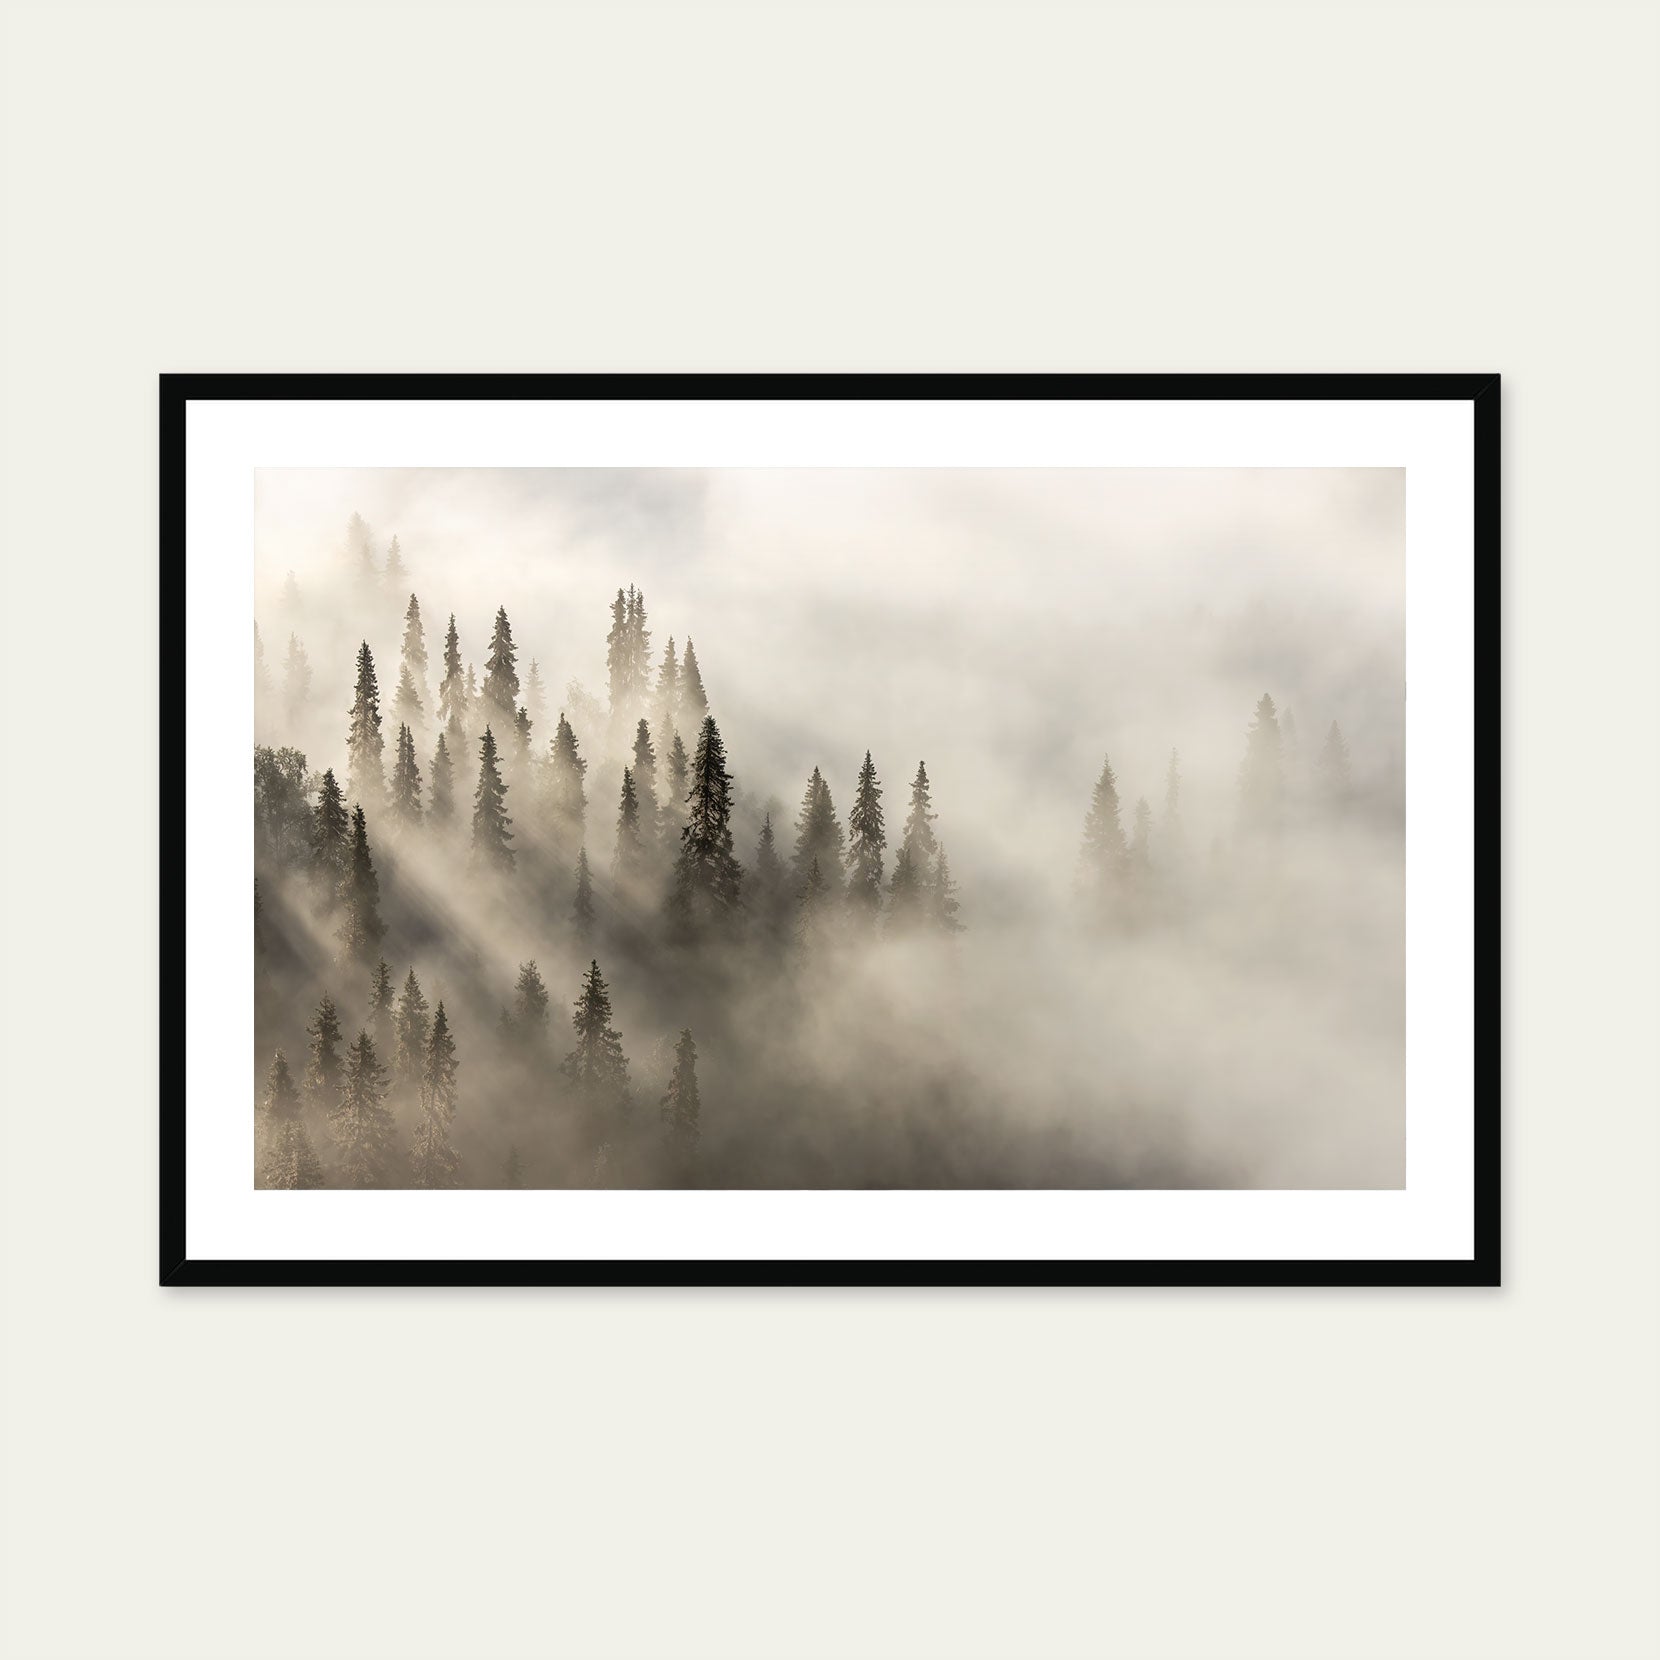 A black framed print of a fog covered forest at dawn